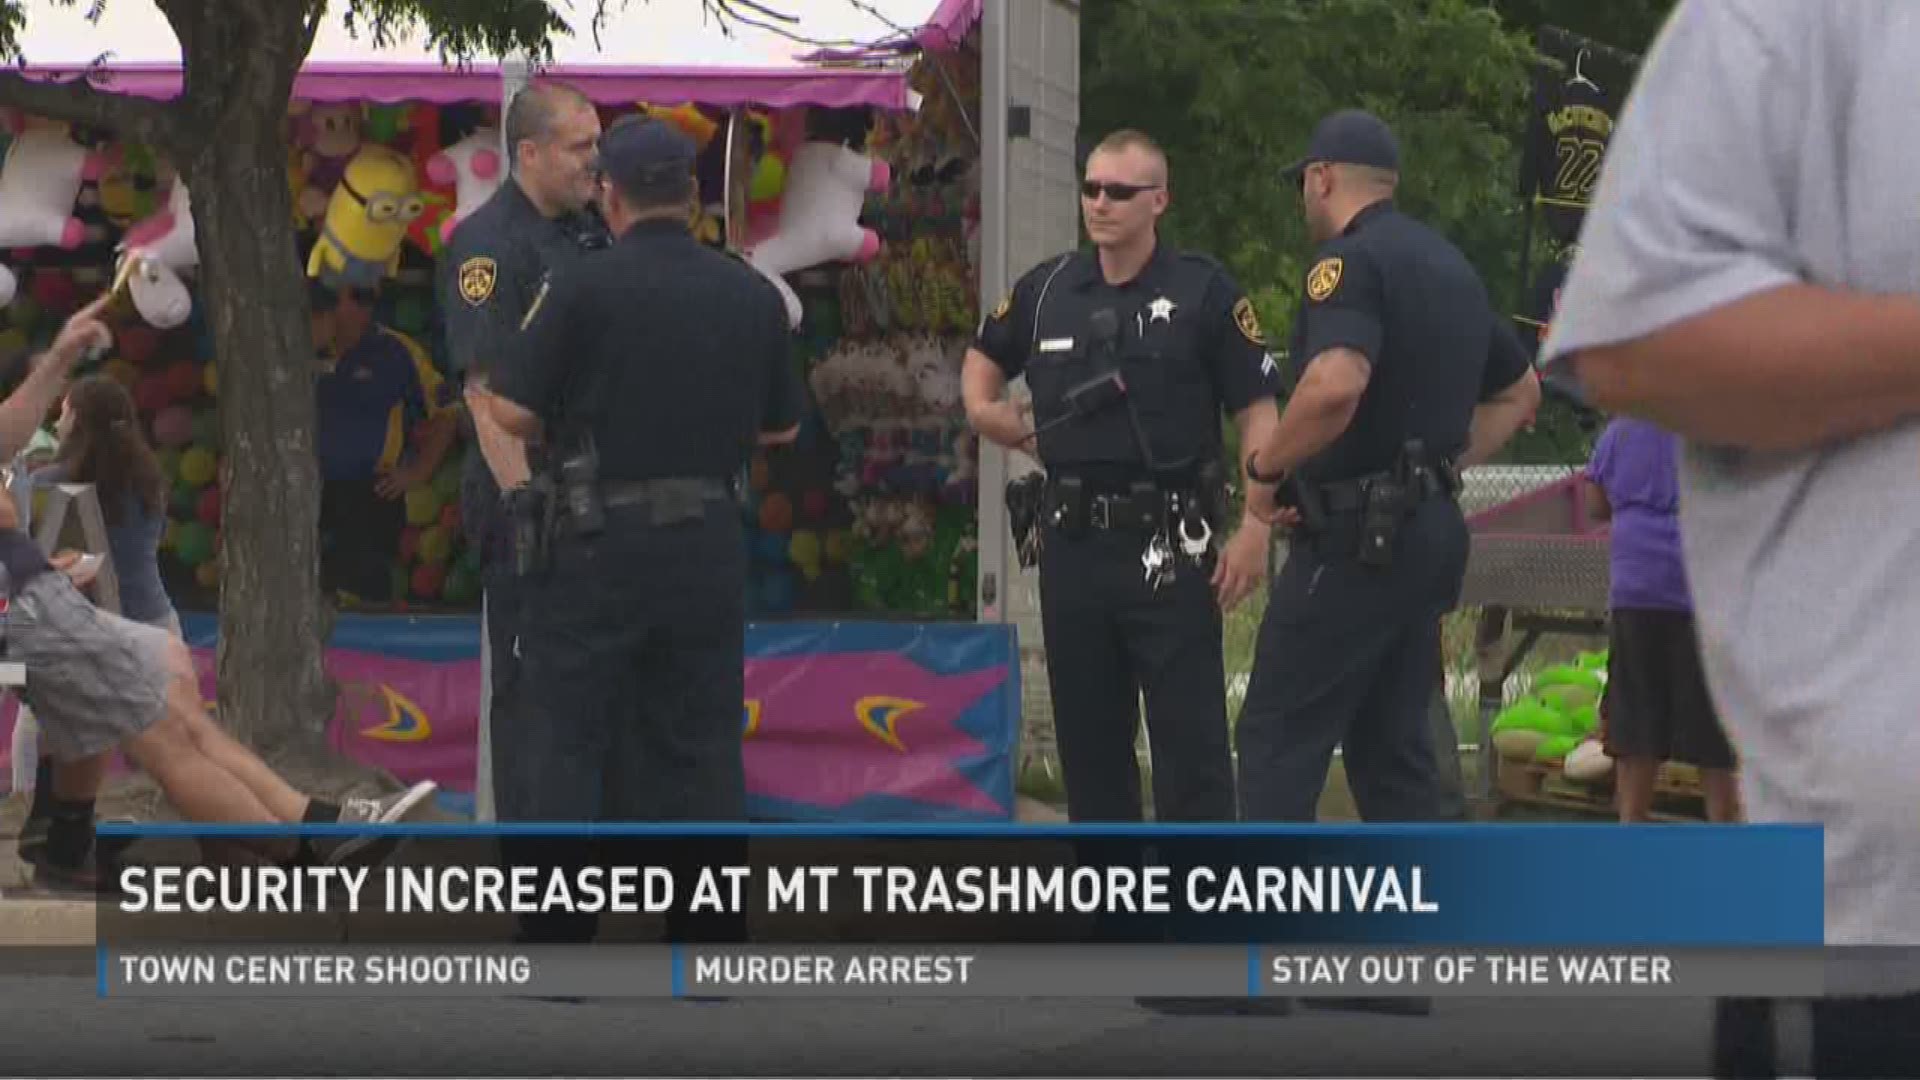 Mount Trashmore carnival set to open, security plans in place